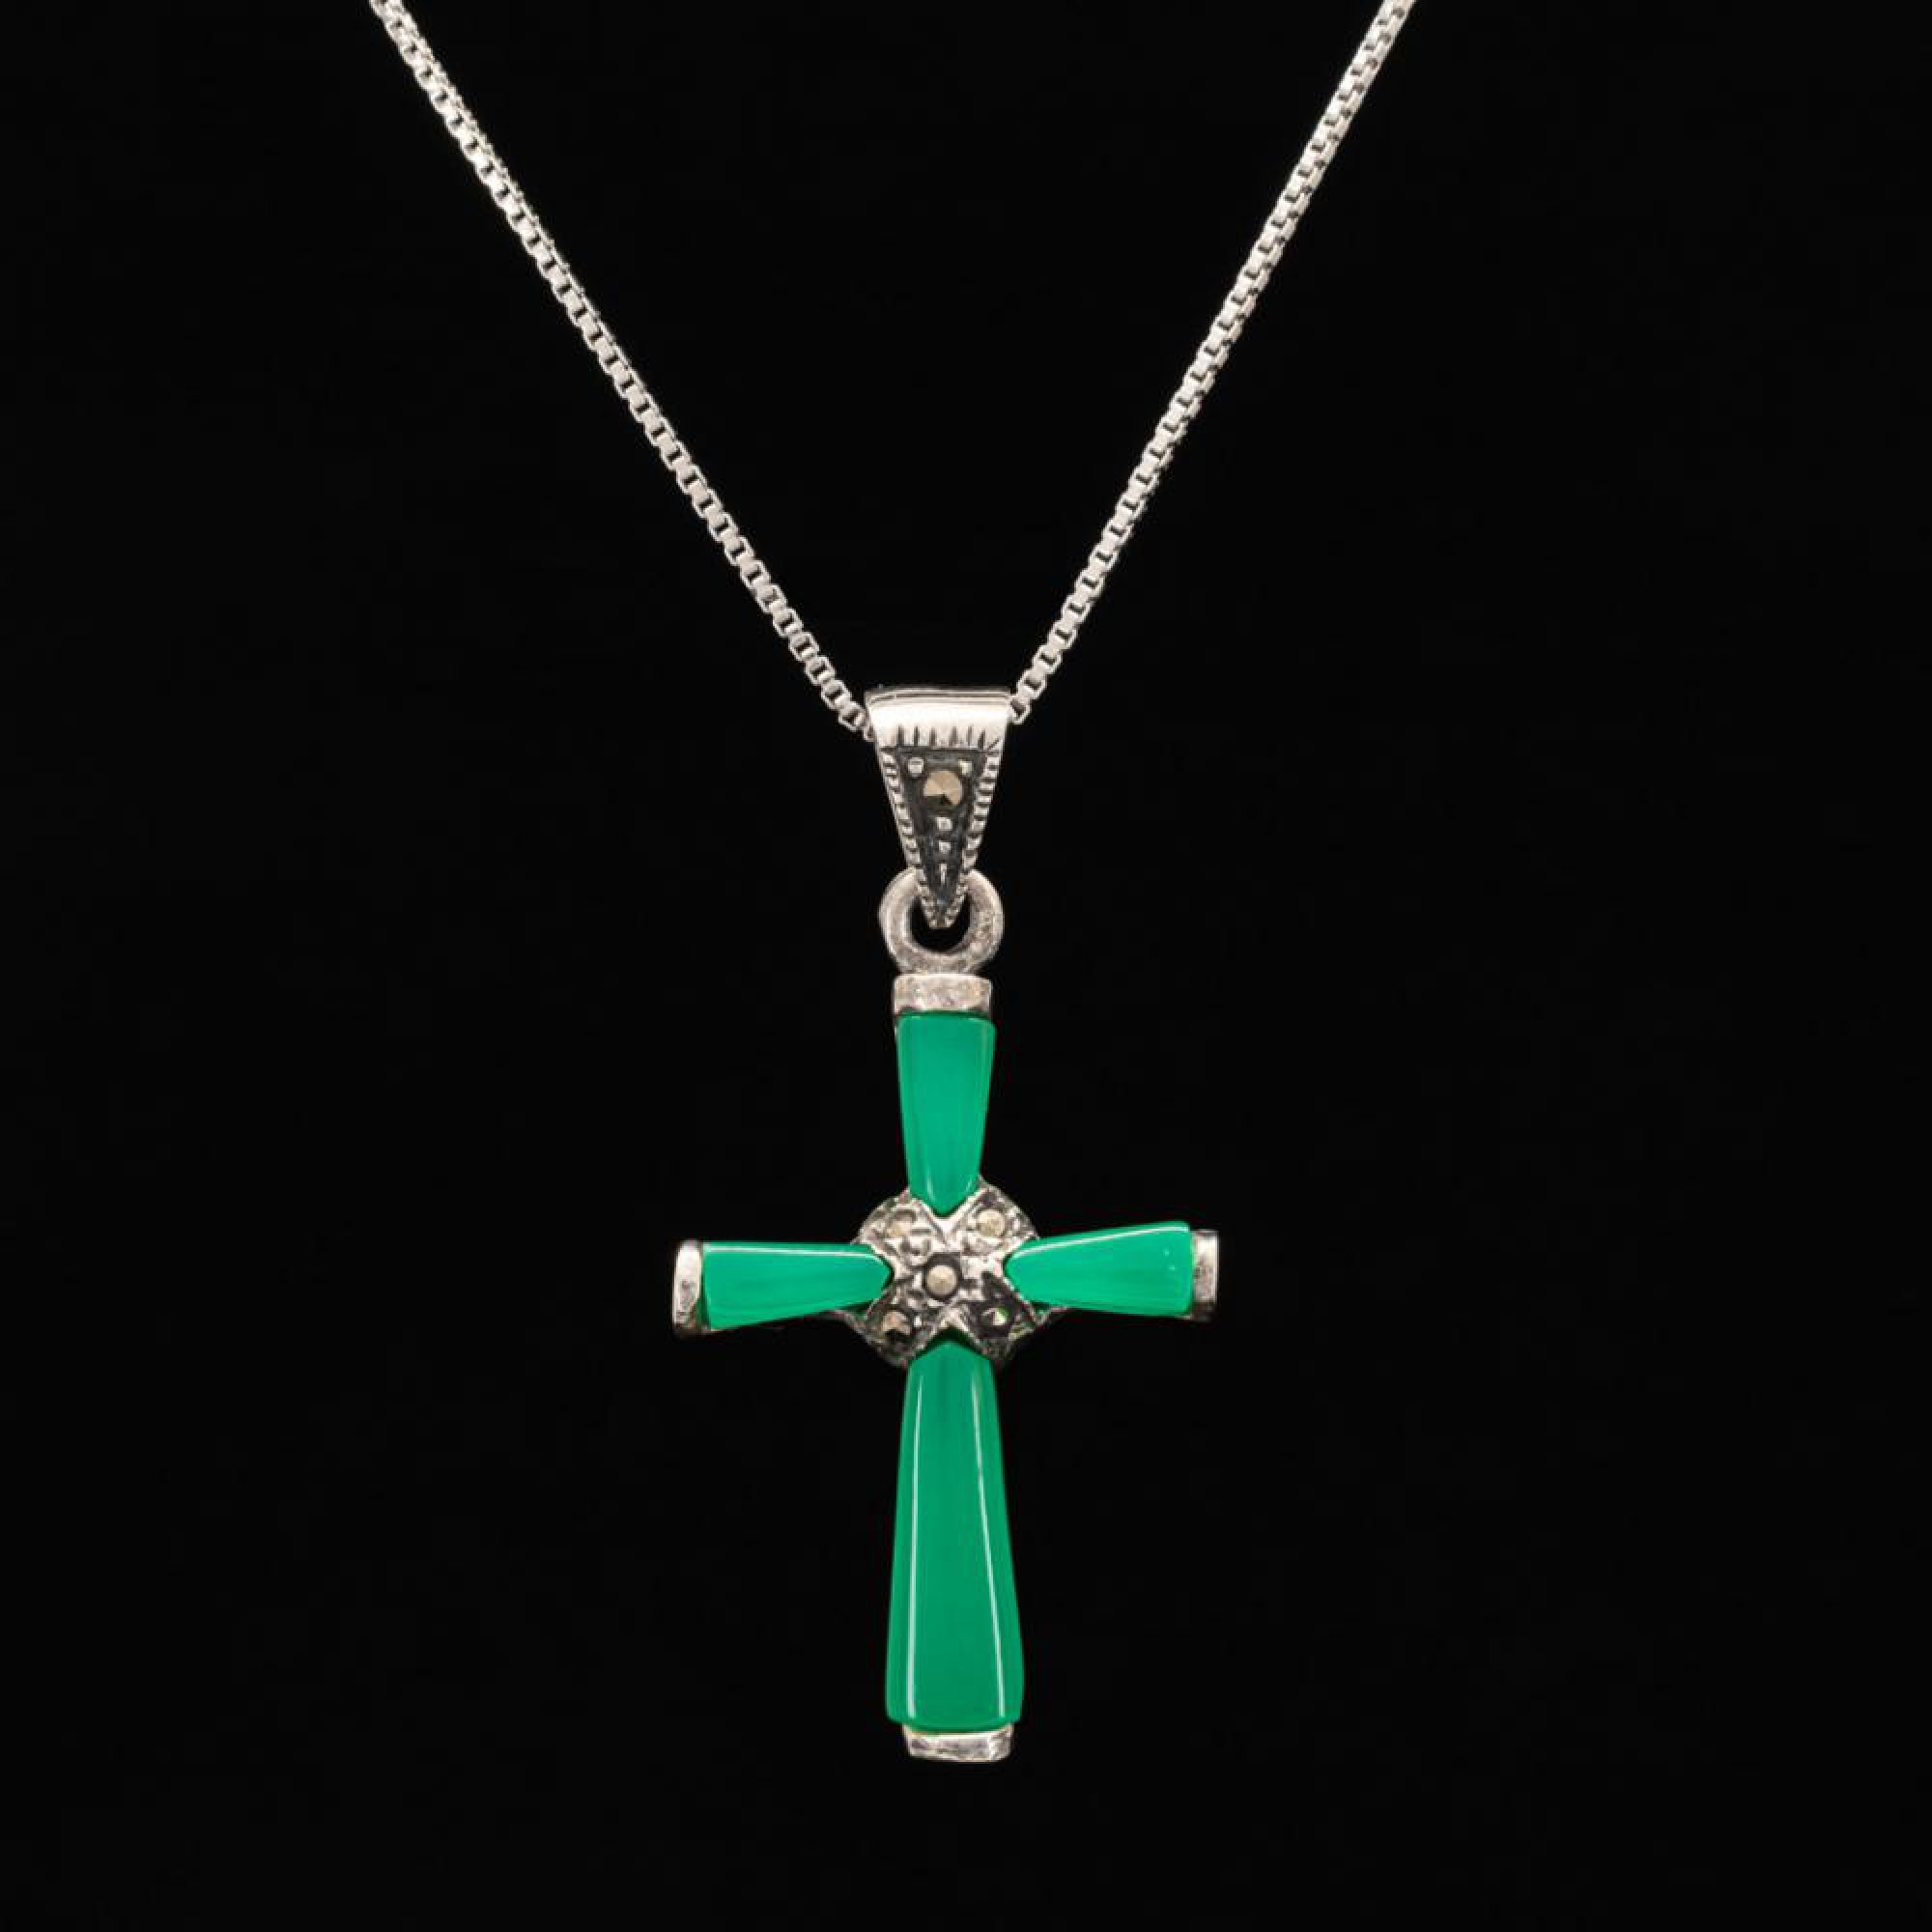 Silver cross with nephrite stone and marcasites